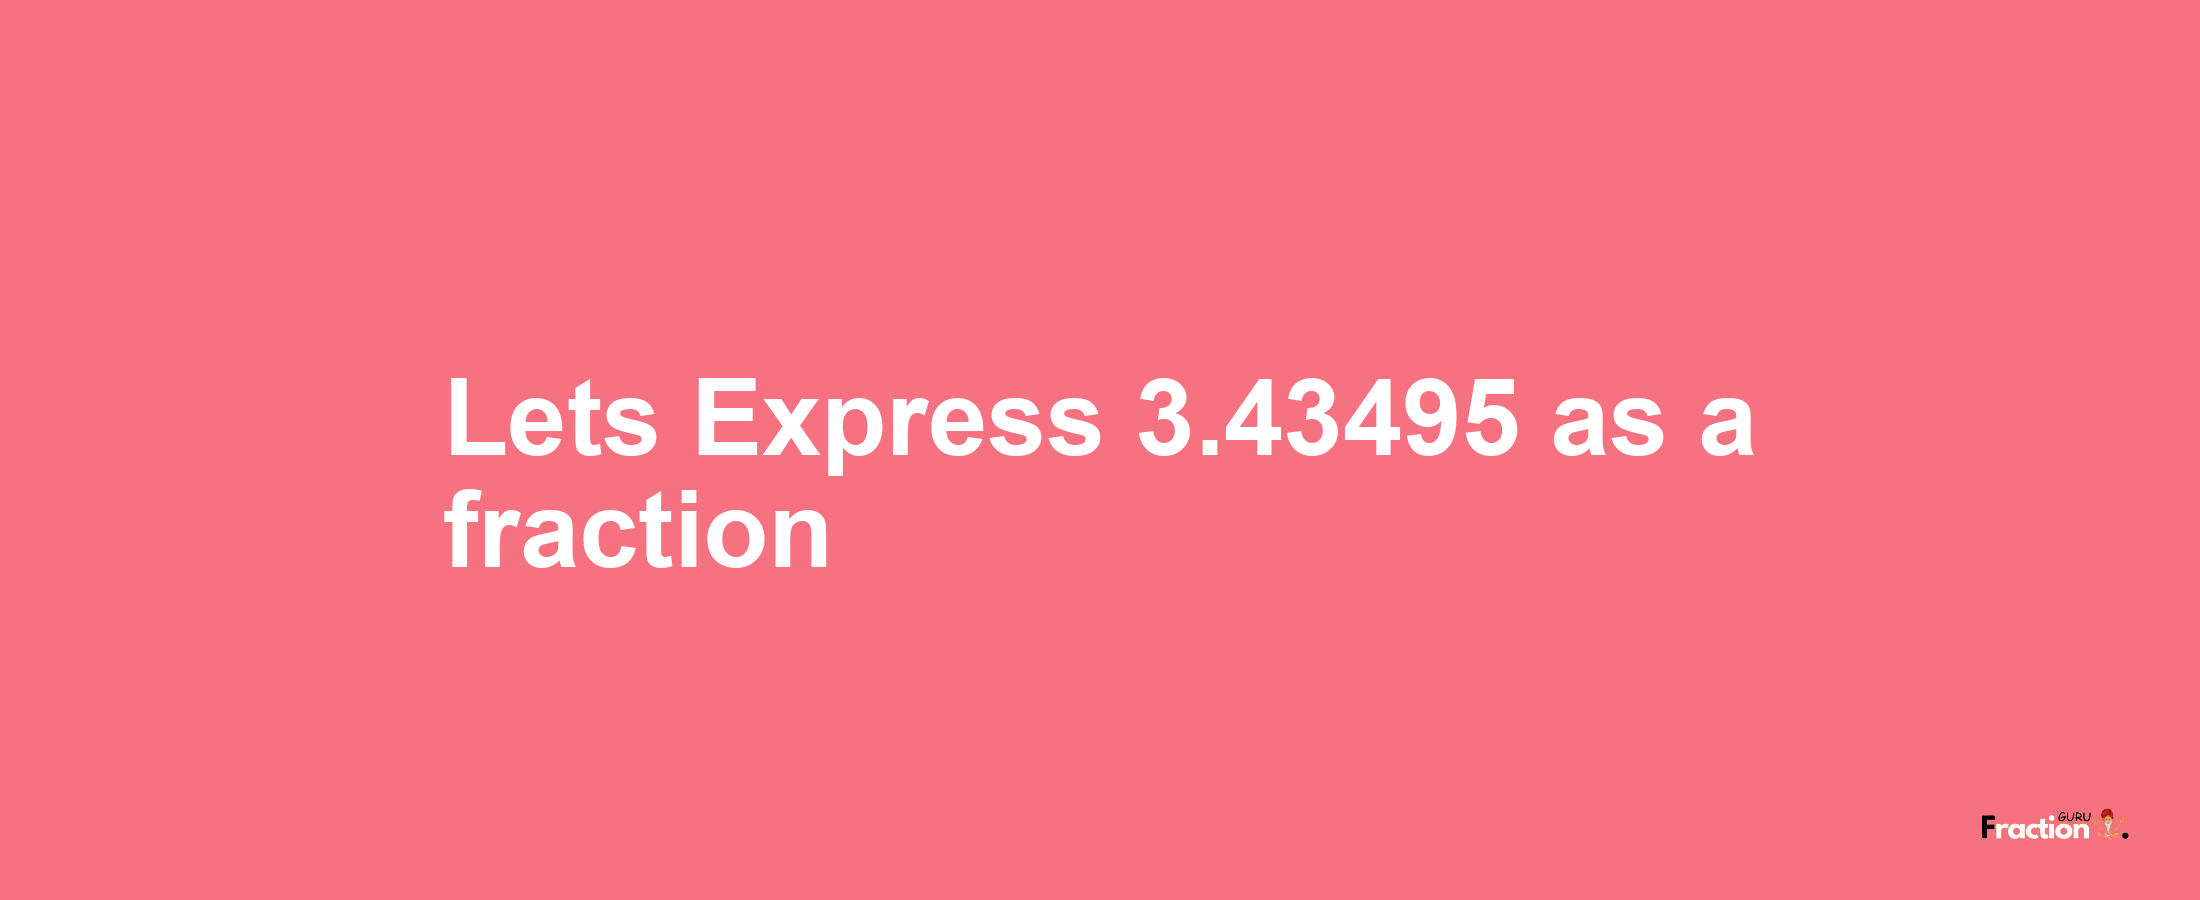 Lets Express 3.43495 as afraction